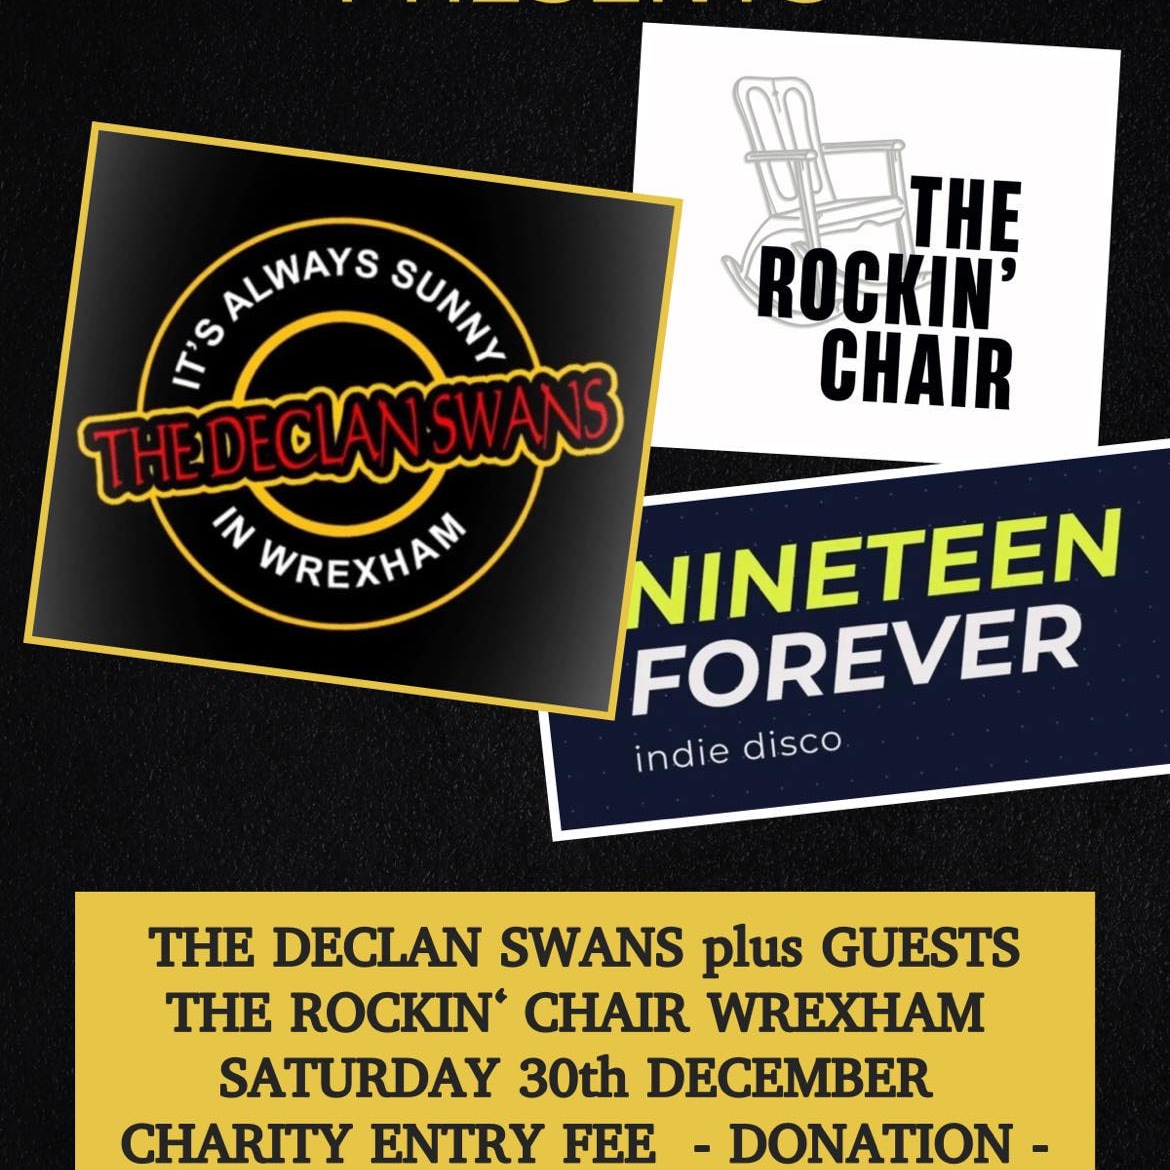 Last gig of the year at The Rockin' Chair Wrexham .. Declan Swans are in .. doors 6pm .. swans on 9pm with afterparty in The Parish Wrexham Free entry but with a charity donation with all monies going to Andys Man Club Wrexham .. minimum £1 come on don’t be a Christmas Scrooge